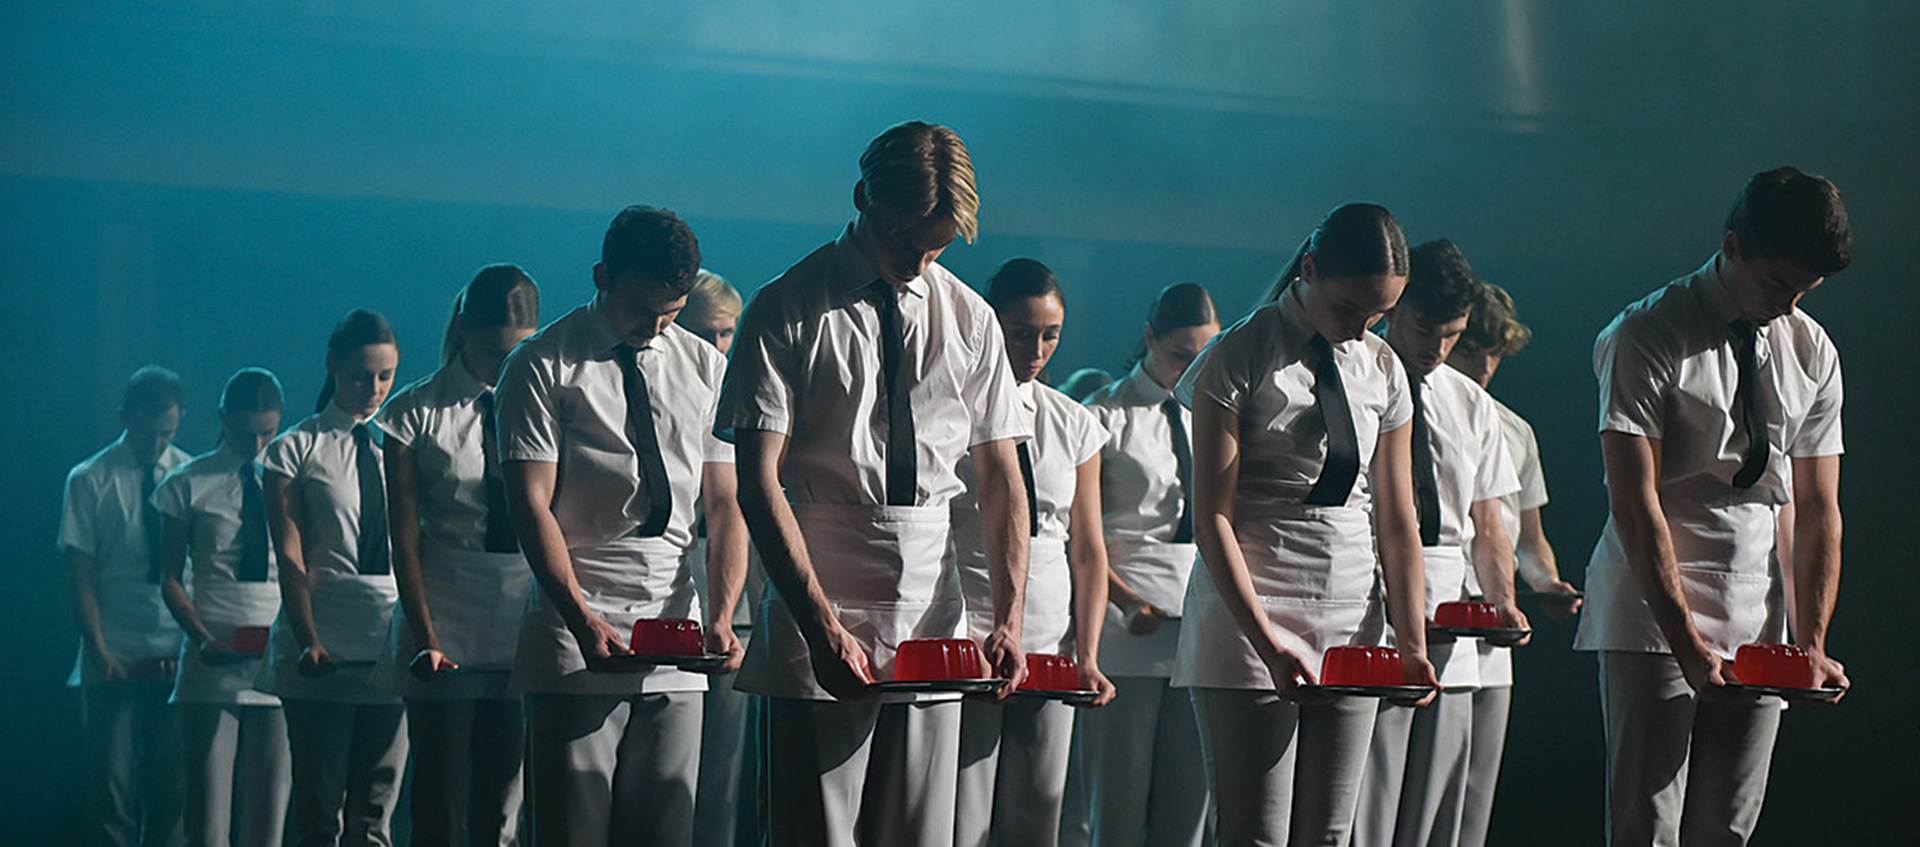 a group of young people wearing all white with black ties looking down at red jello they are holding